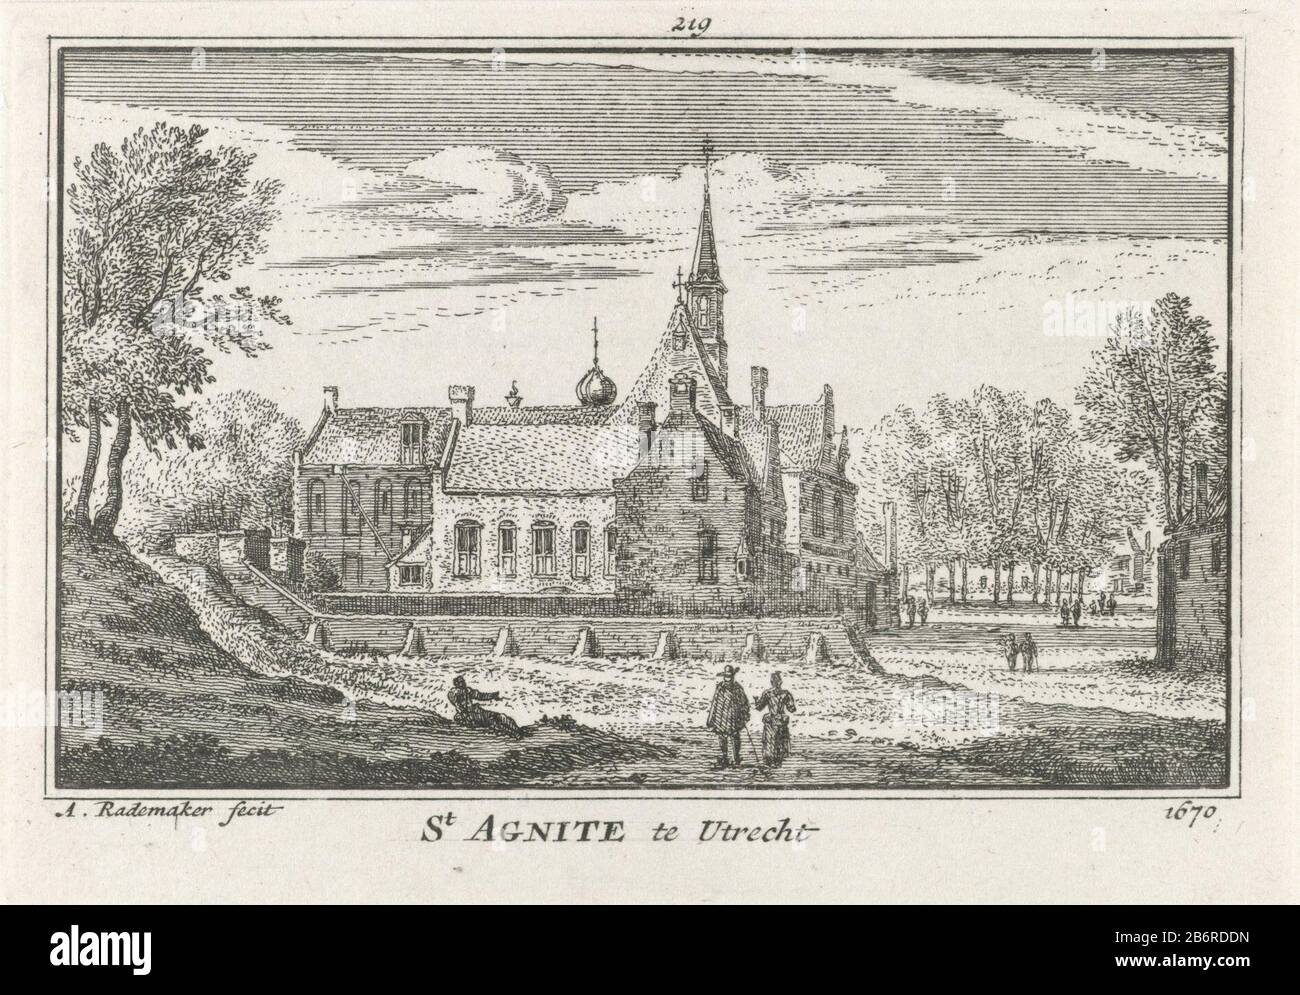 Gezicht op het St-Agnietenklooster te Utrecht, 1670 St Agnite te Utrecht 1670 (titel op object) View of St. Saint Agnes Convent in Utrecht left the rampart and in the background the Nicolaaskerkhof, the situation around 1670. Manufacturer : print maker: Abraham Rademaker (indicated on object) publisher: Willem Barents Publisher: Antoni Schoonenburg Place manufacture: Amsterdam Date: 1727 - 1733 Physical characteristics: etching and engra material: paper Technique: etching / engra (printing process) Measurements: plate edge: h 80 mm × W 115 mmToelichtingIllustratie from Abraham Rademaker, Matth Stock Photo